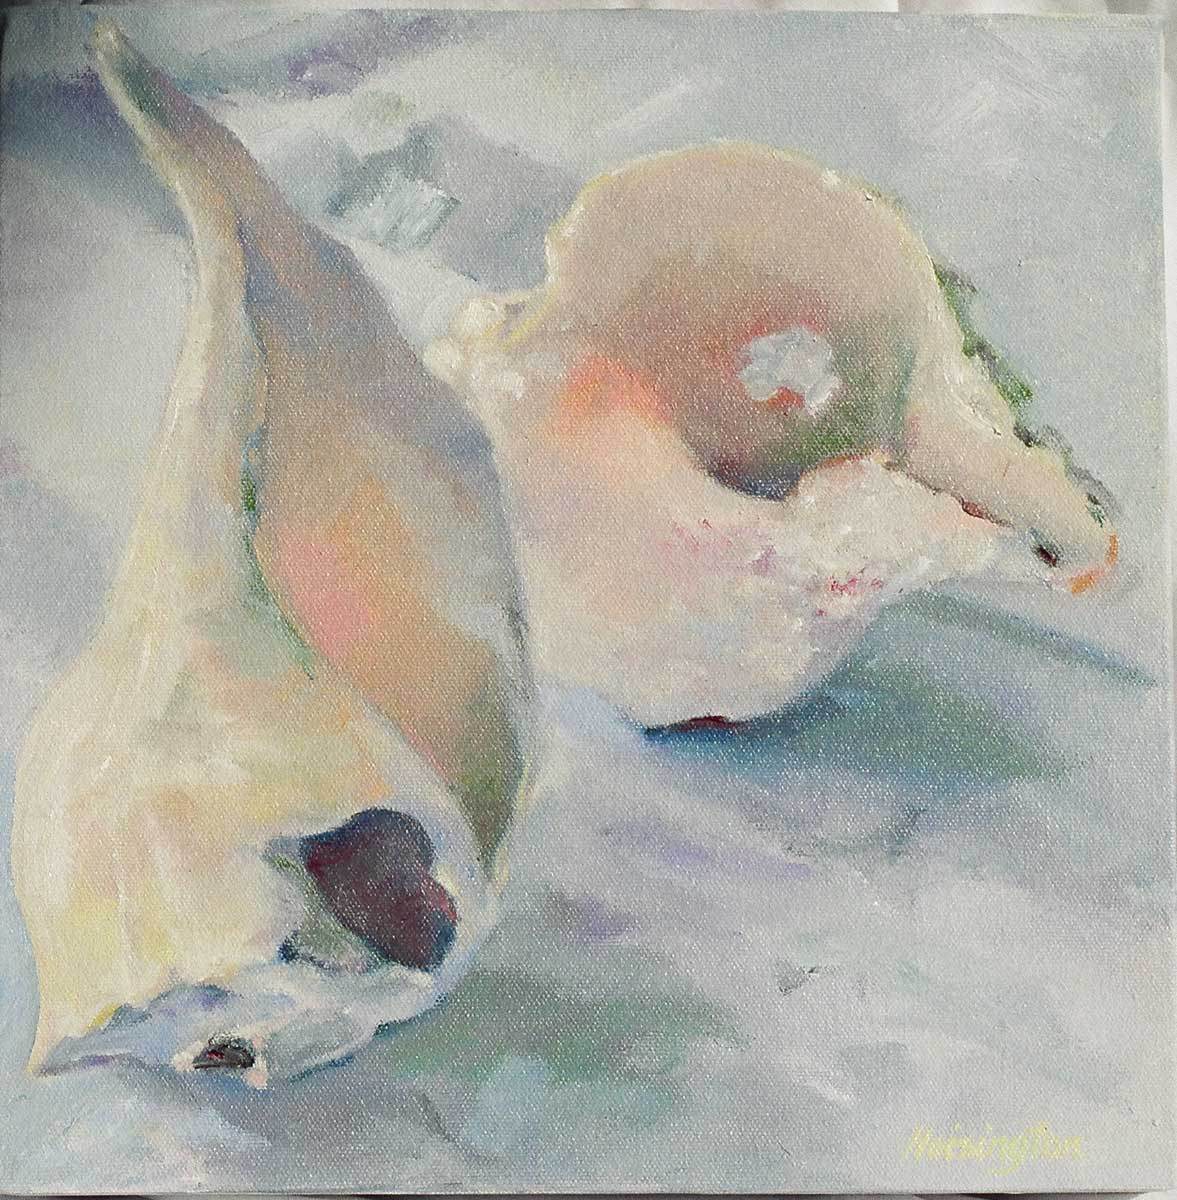 "Old Beauties #1" oil on canvas, 1x1 foot , 31x31 cm [private collection, Sanibel, Florida, USA]